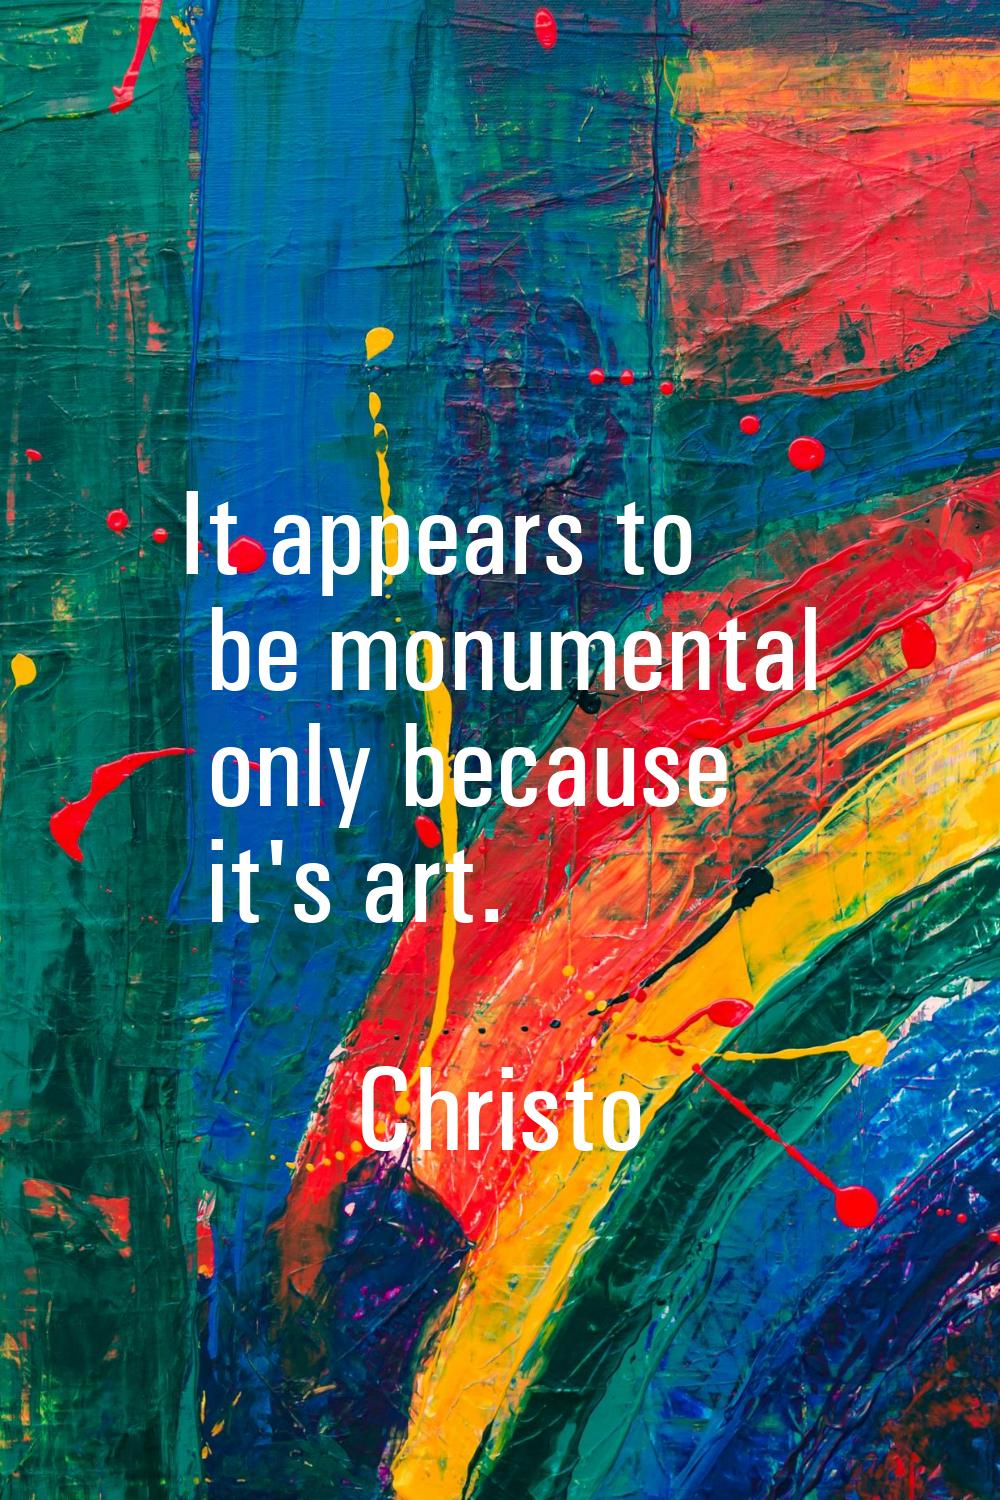 It appears to be monumental only because it's art.